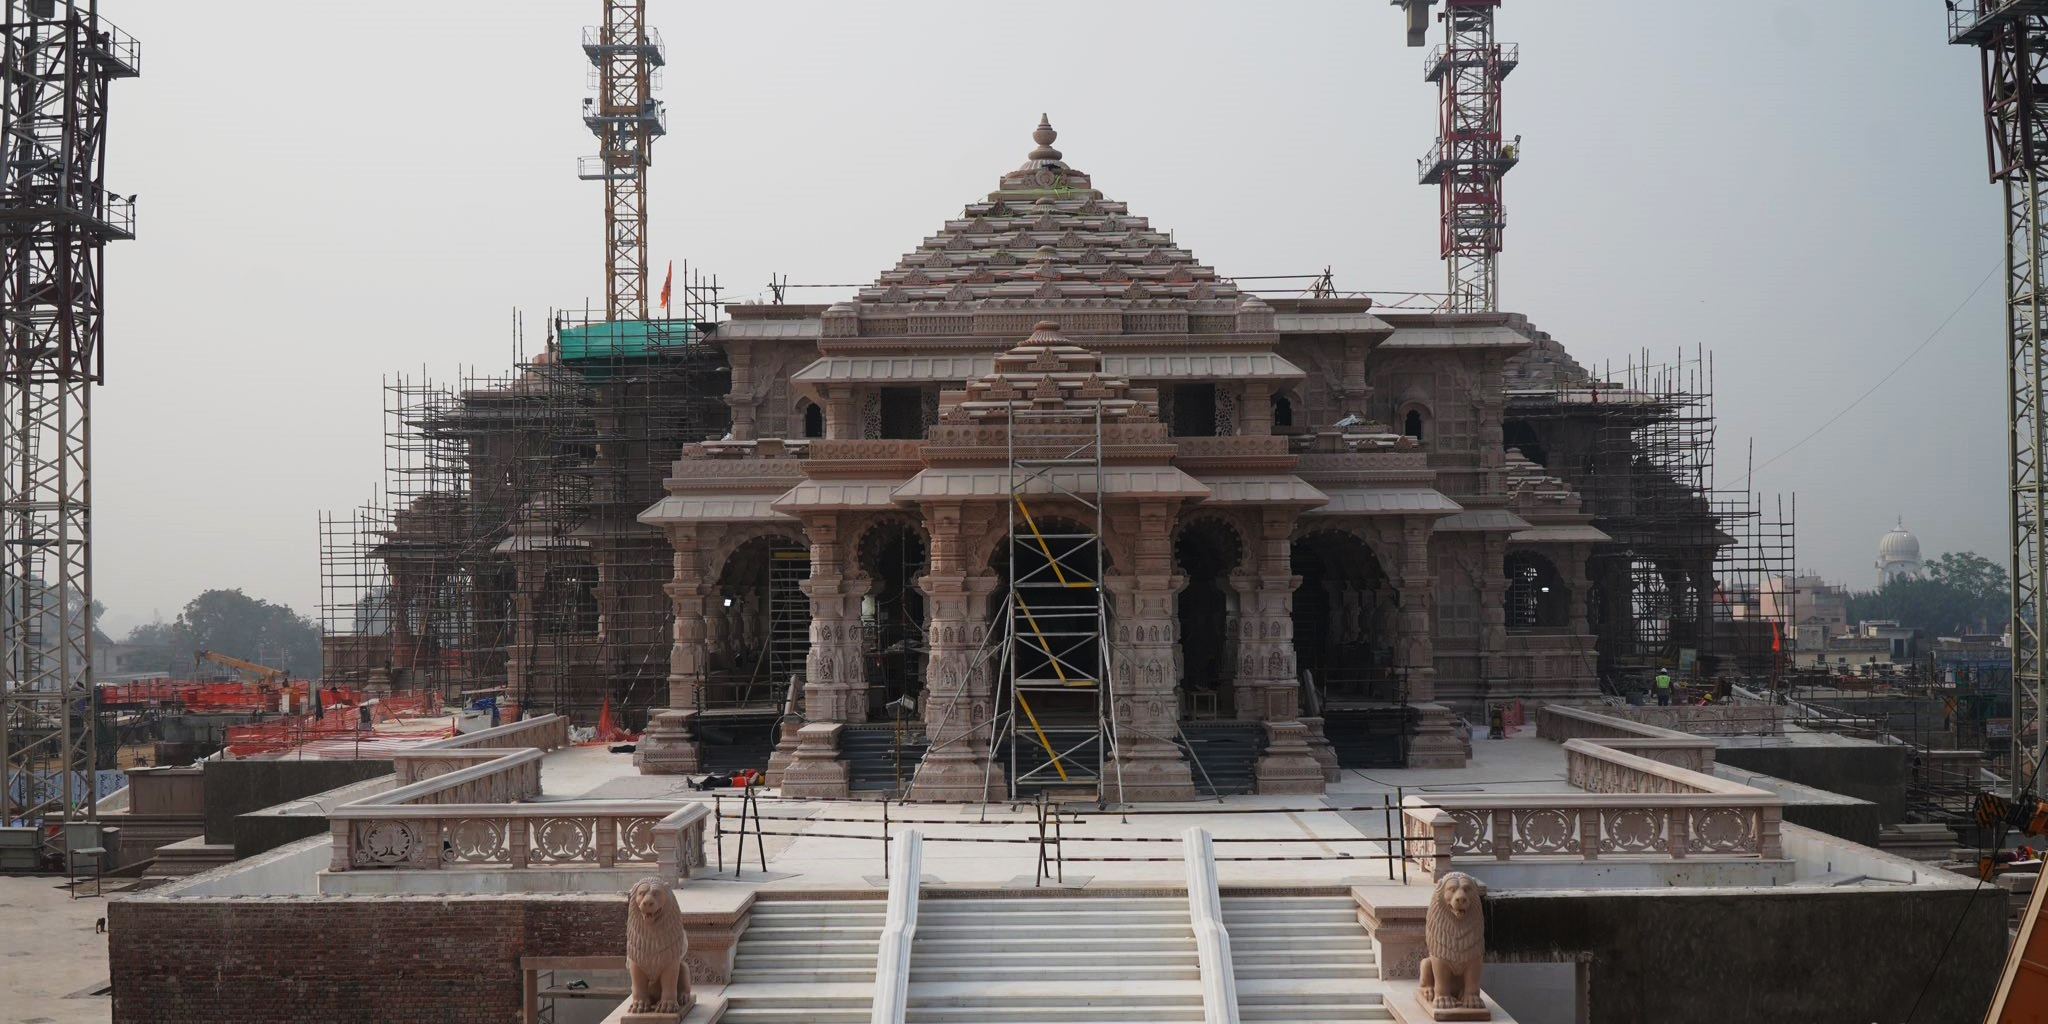 File photo of the under-construction Ram Temple in Ayodhya.